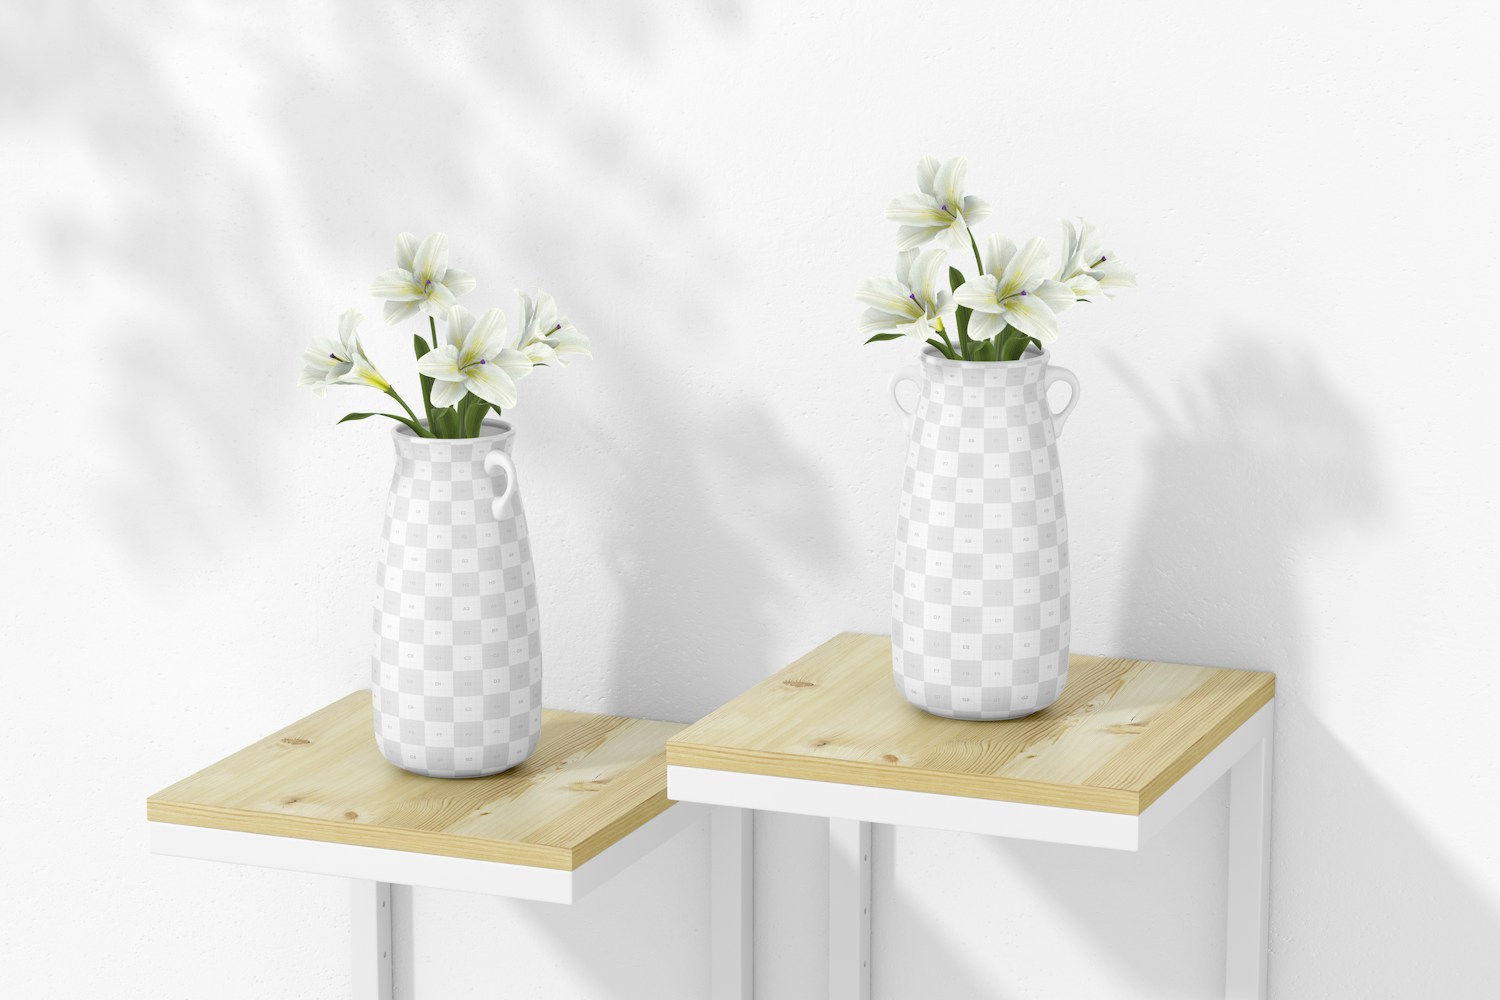 Ceramic Vases with Handle Mockup, Perspective